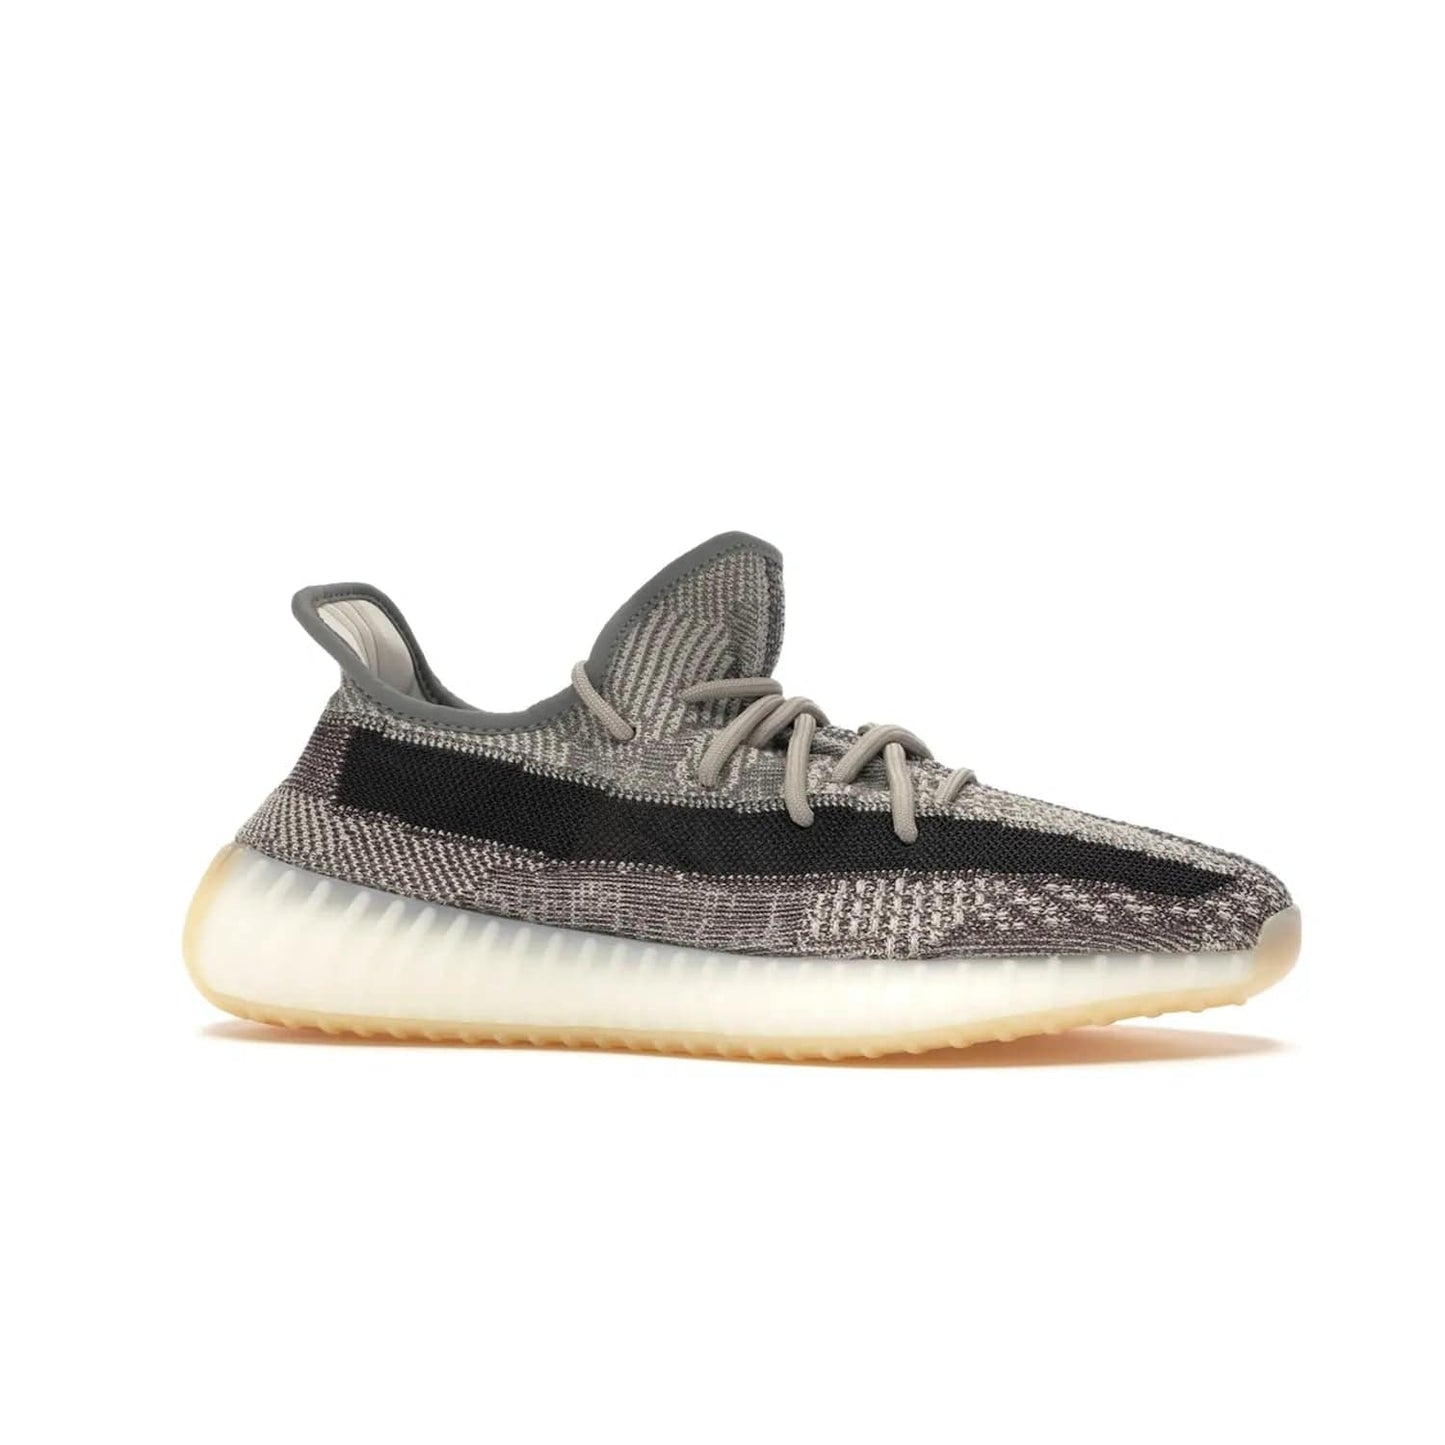 adidas Yeezy Boost 350 V2 Zyon - Image 2 - Only at www.BallersClubKickz.com - Step up your style game with the adidas Yeezy Boost 350 V2 Zyon. This sleek sneaker features a Primeknit upper, dark side stripe, translucent Boost sole, and creamy white interior providing style and comfort. Get them now!